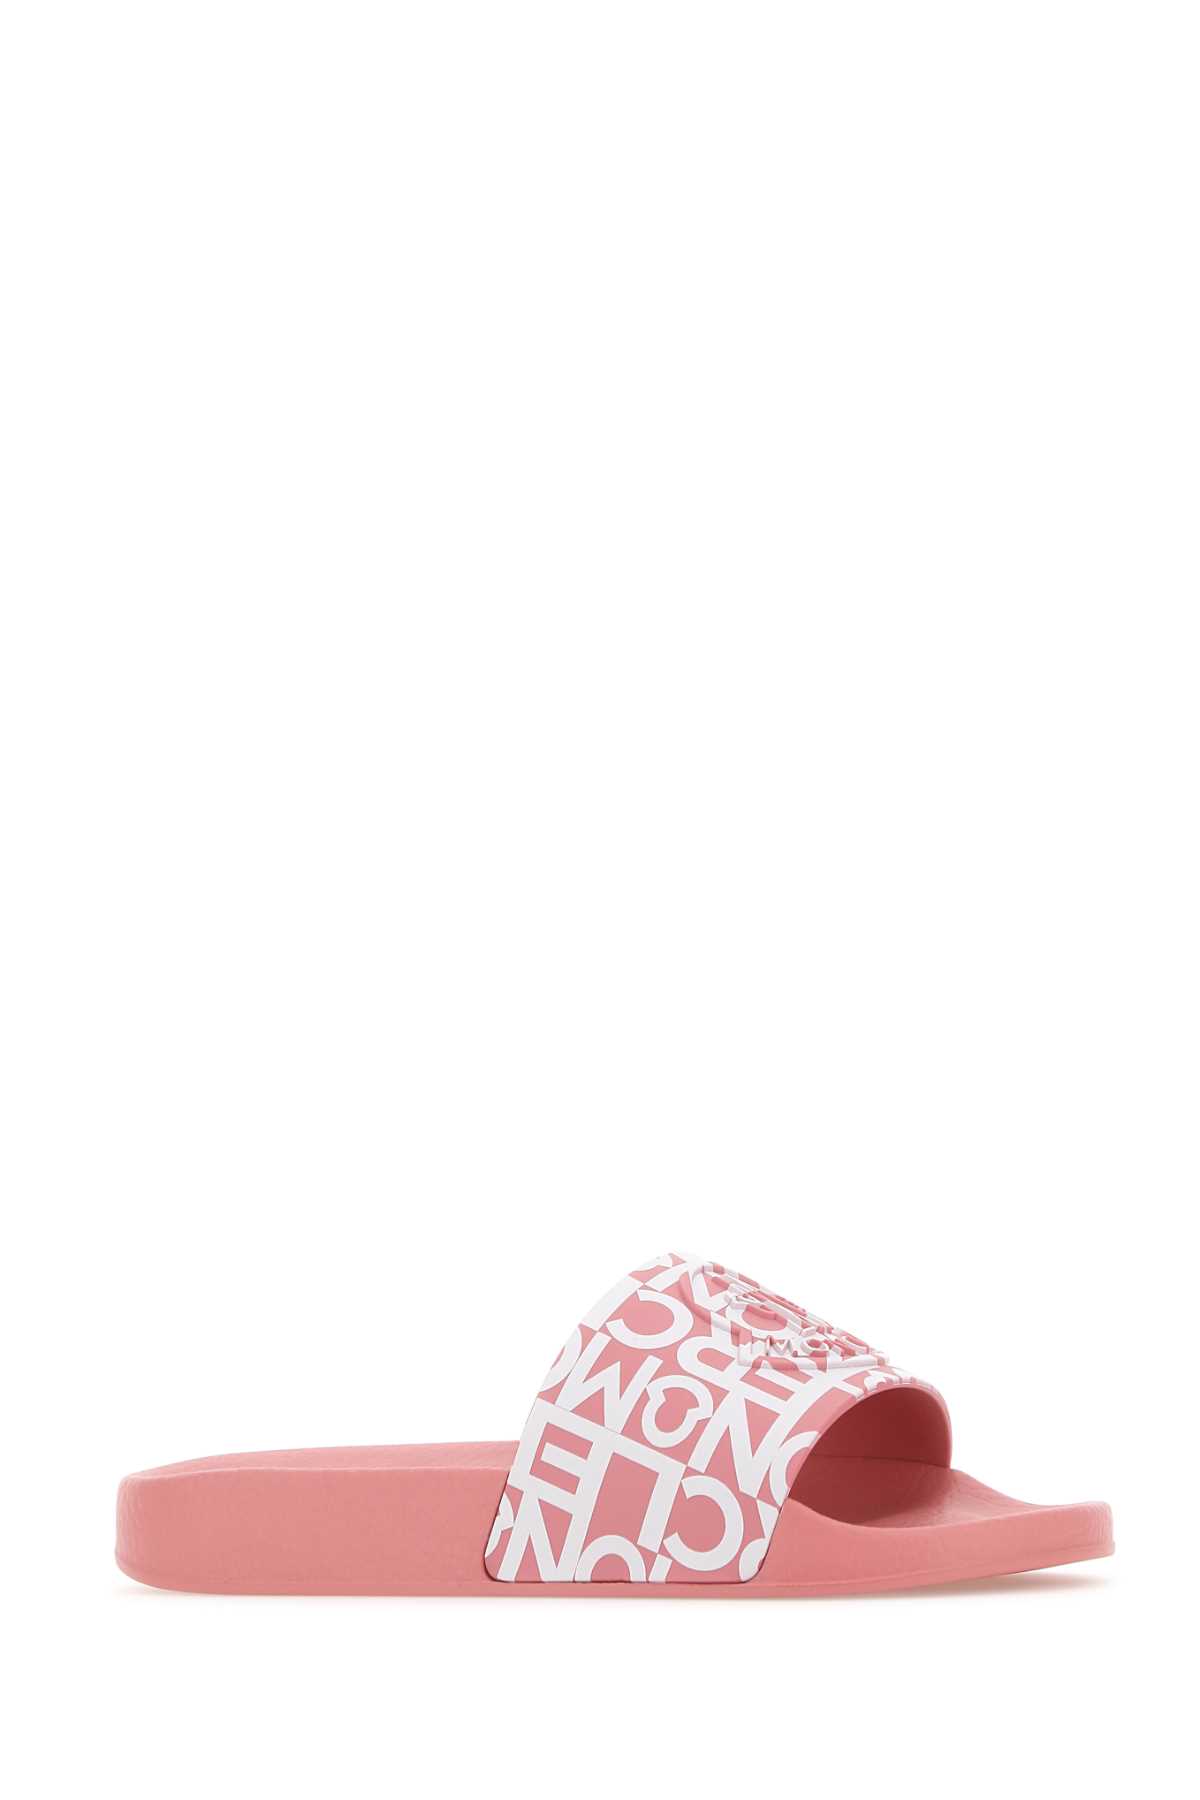 Moncler Printed Rubber Jeanne Slippers In Pink